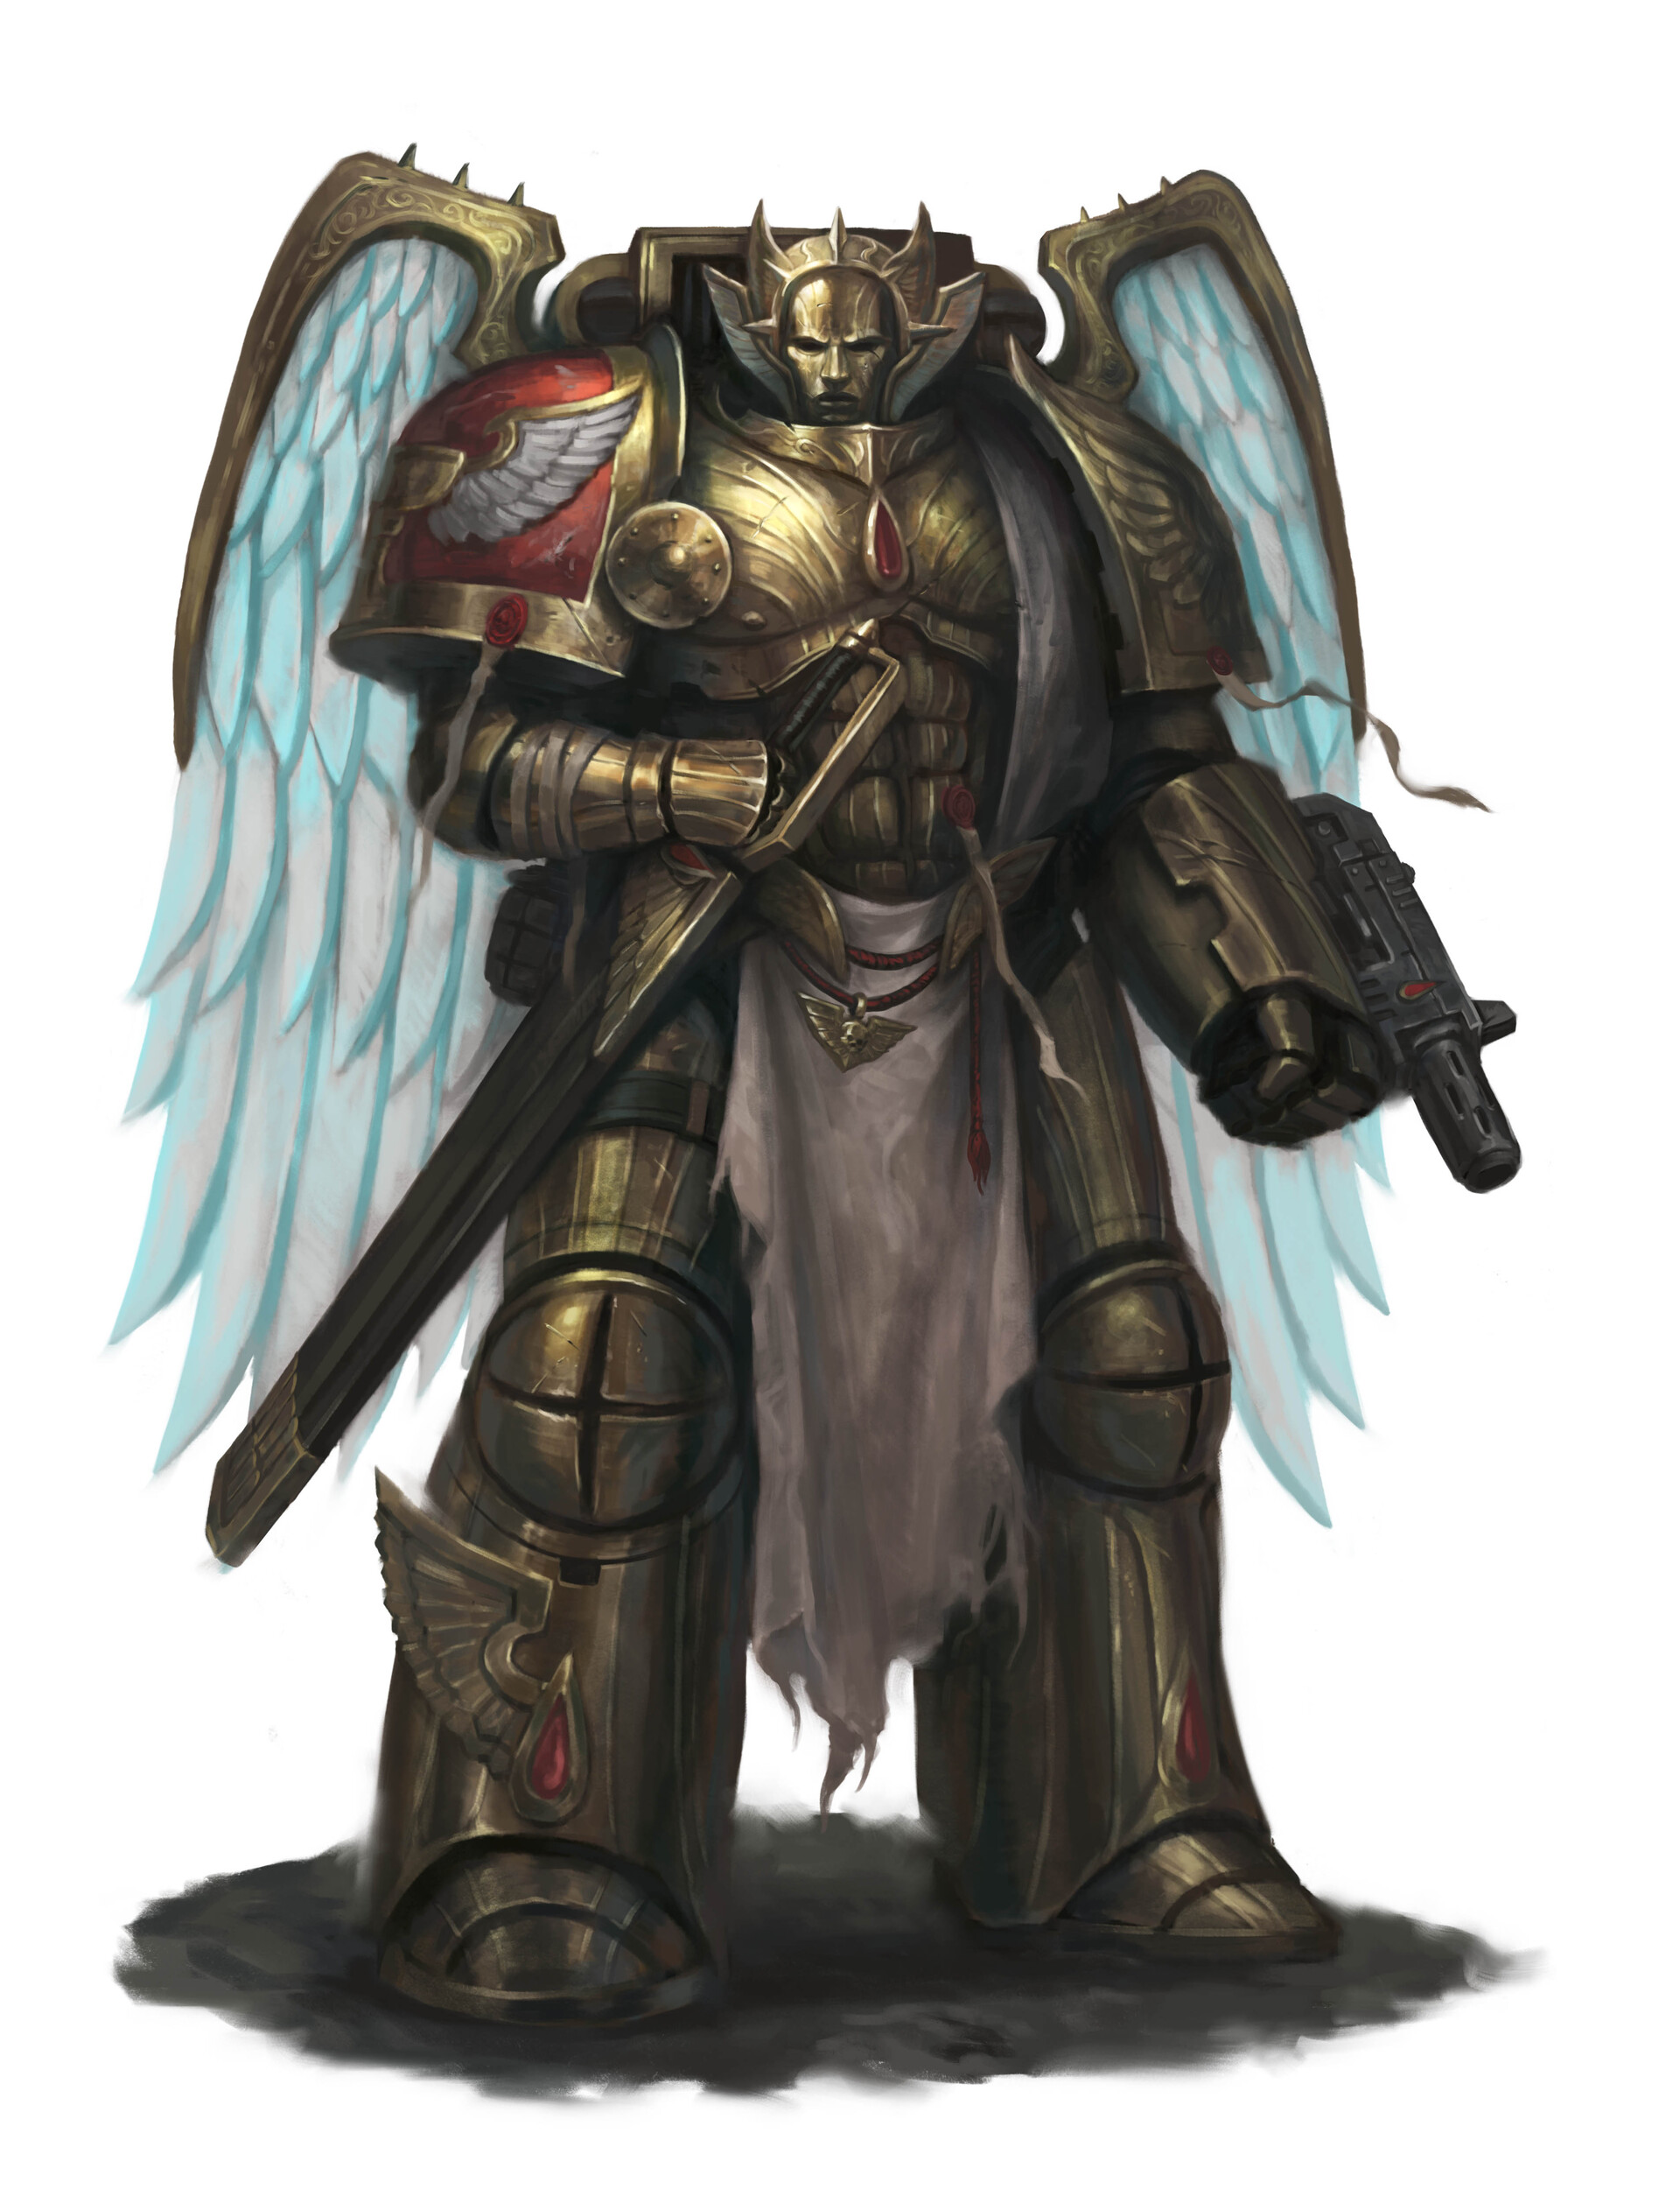 Painted a custom Sanguinary guard with a seraphim helmet variant for my OC ...